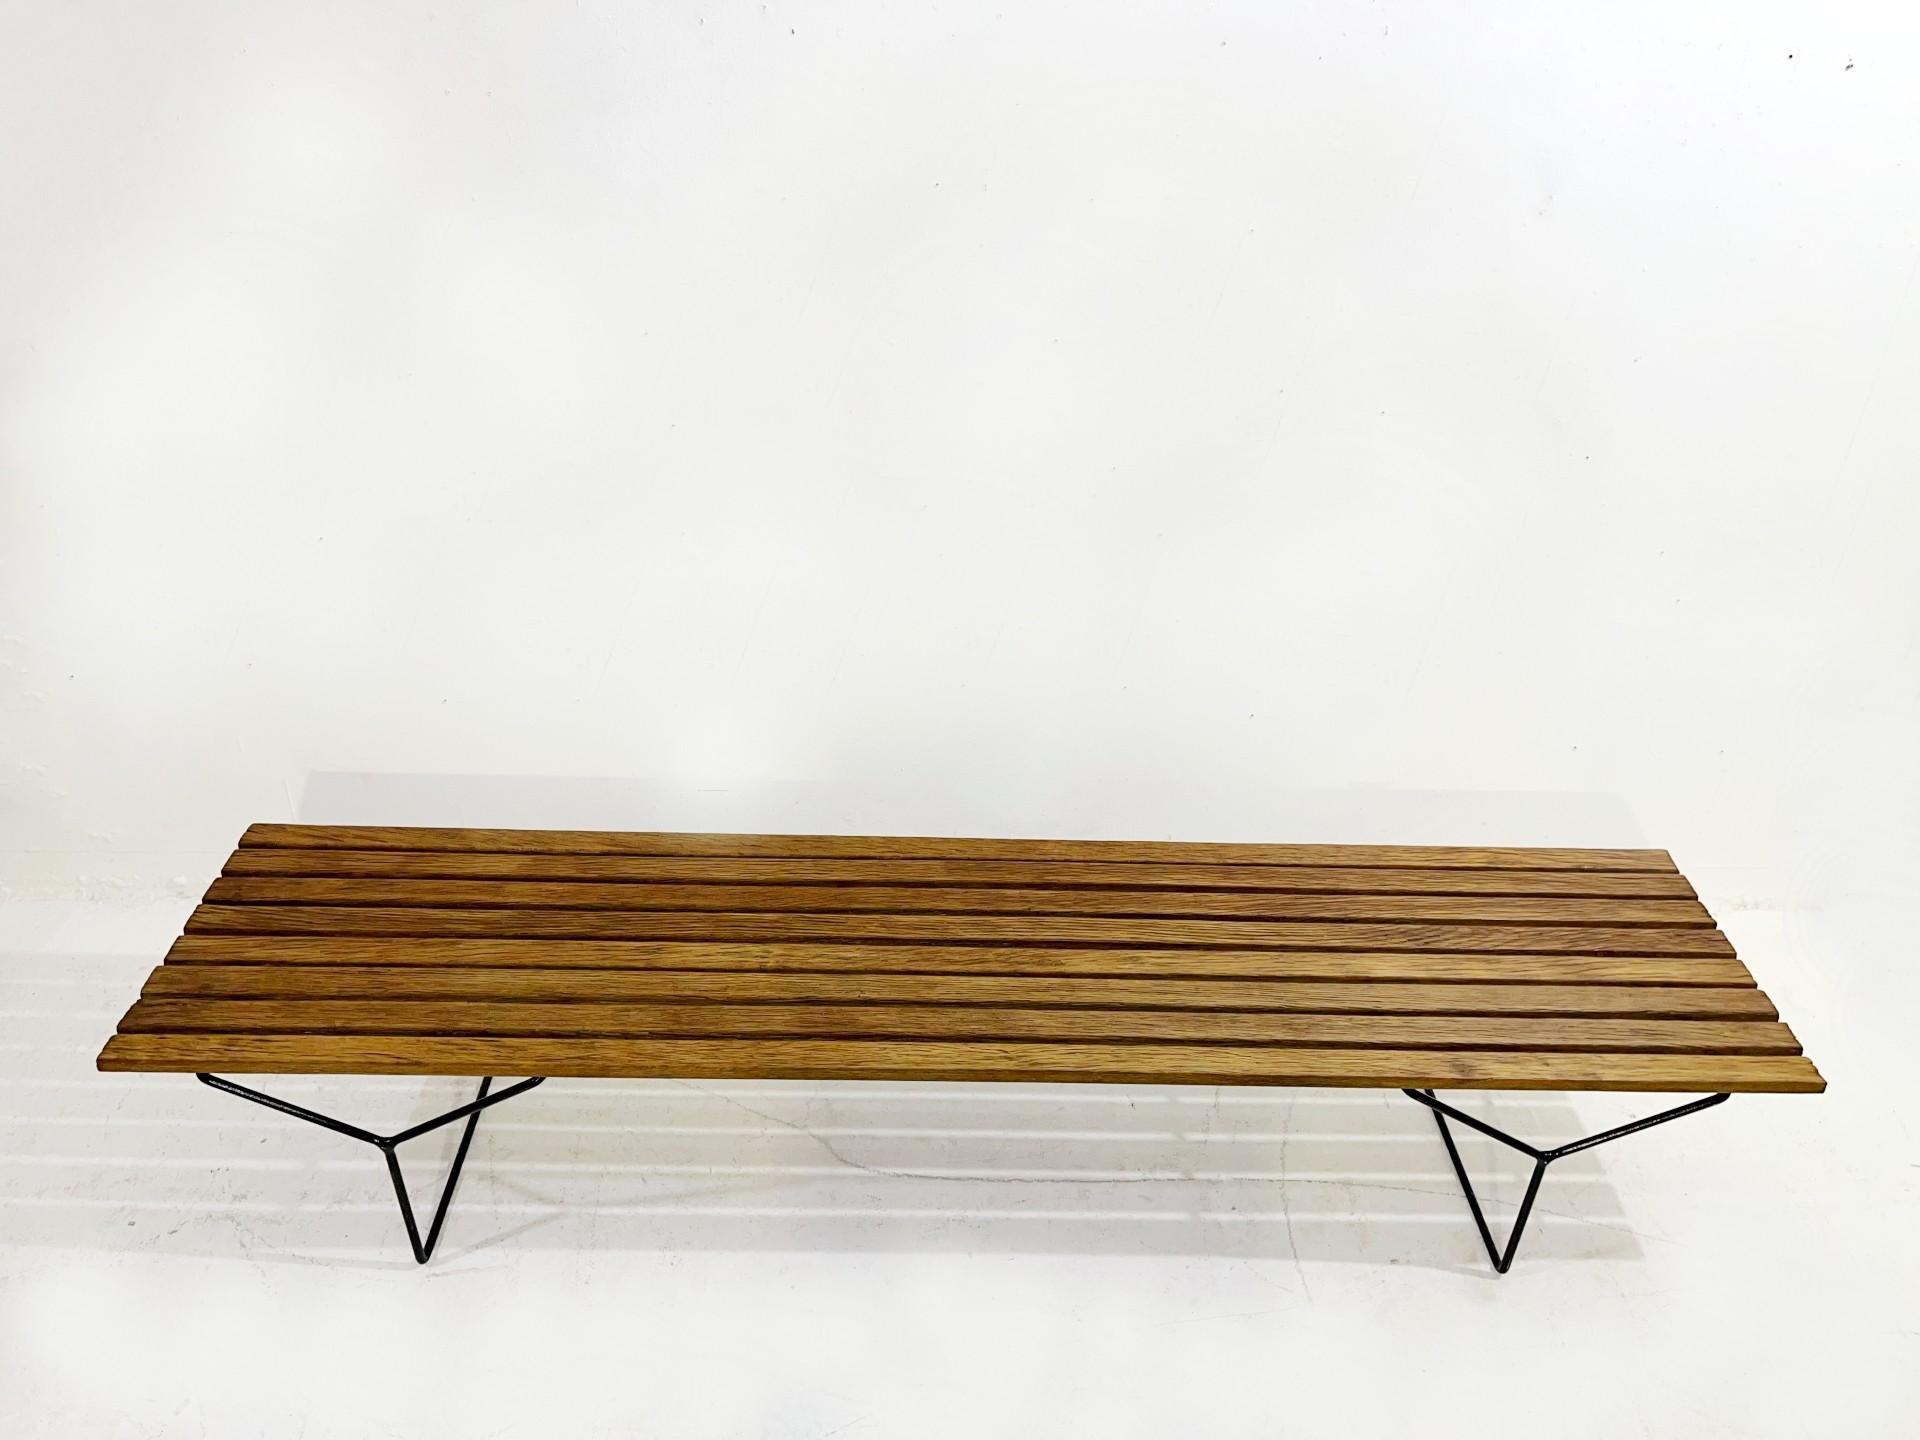 Magnificent bench by Harry Bertoia for Knoll from the mid-century.
This magnificent bench made of oak wood and a black metal leg is in very good vintage condition.
It has been restored in order to give it a little youthful taste. As you can see in